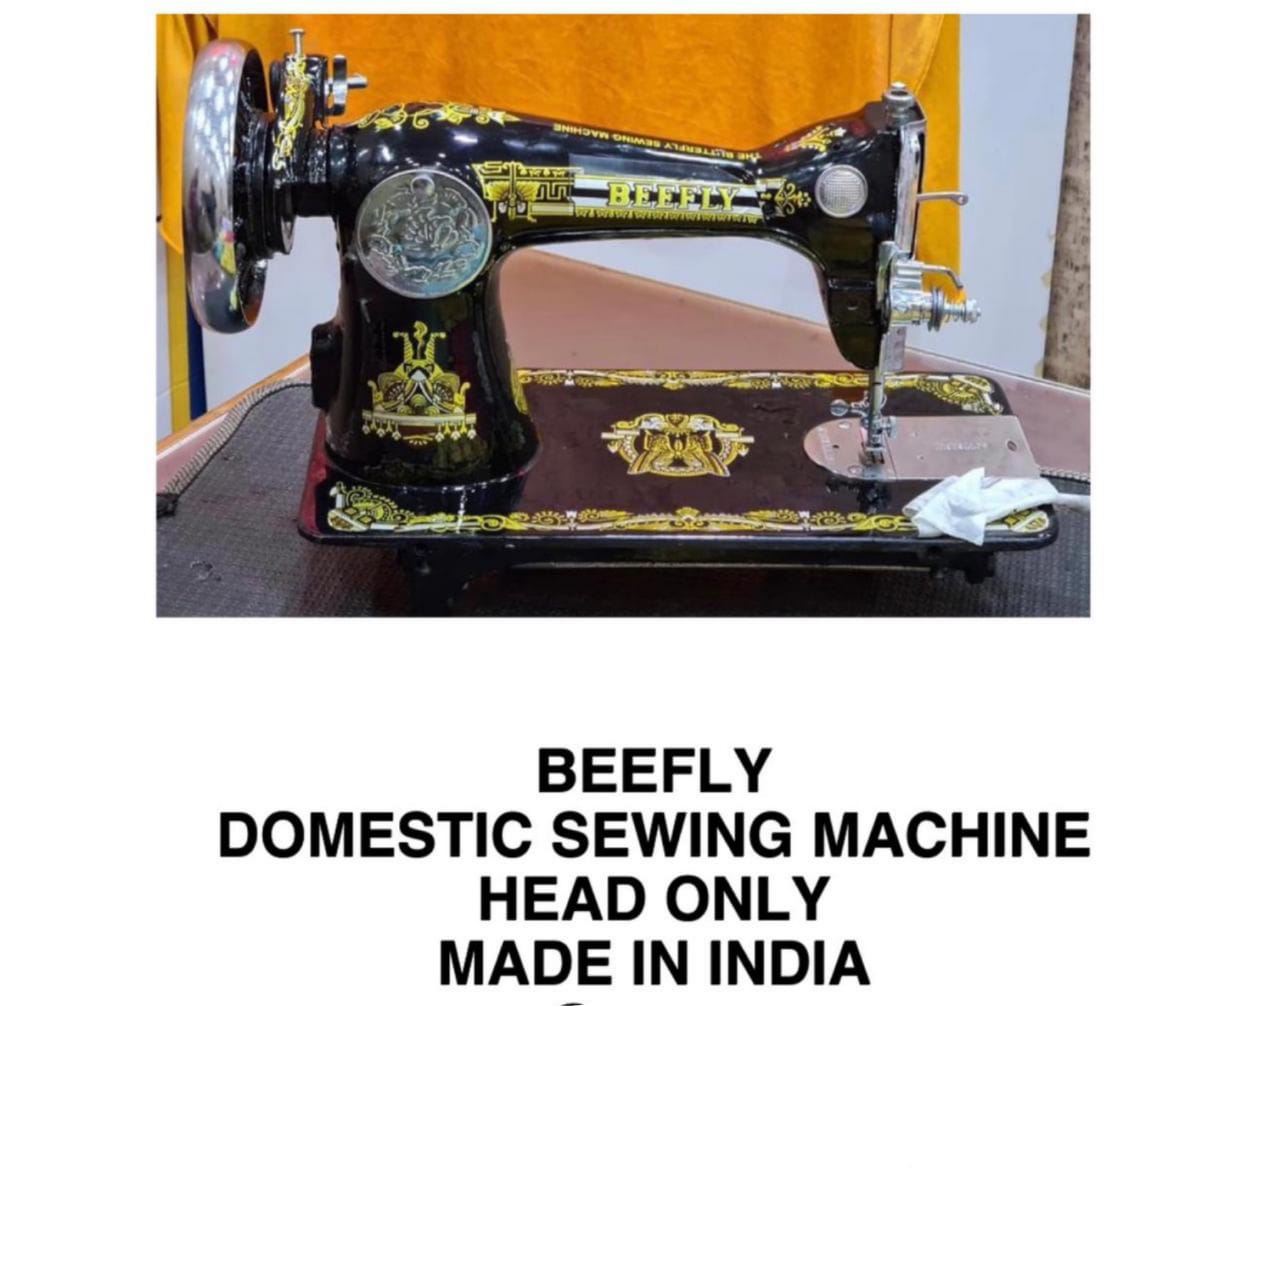 New Domestic Sewing Machine 2 with Head